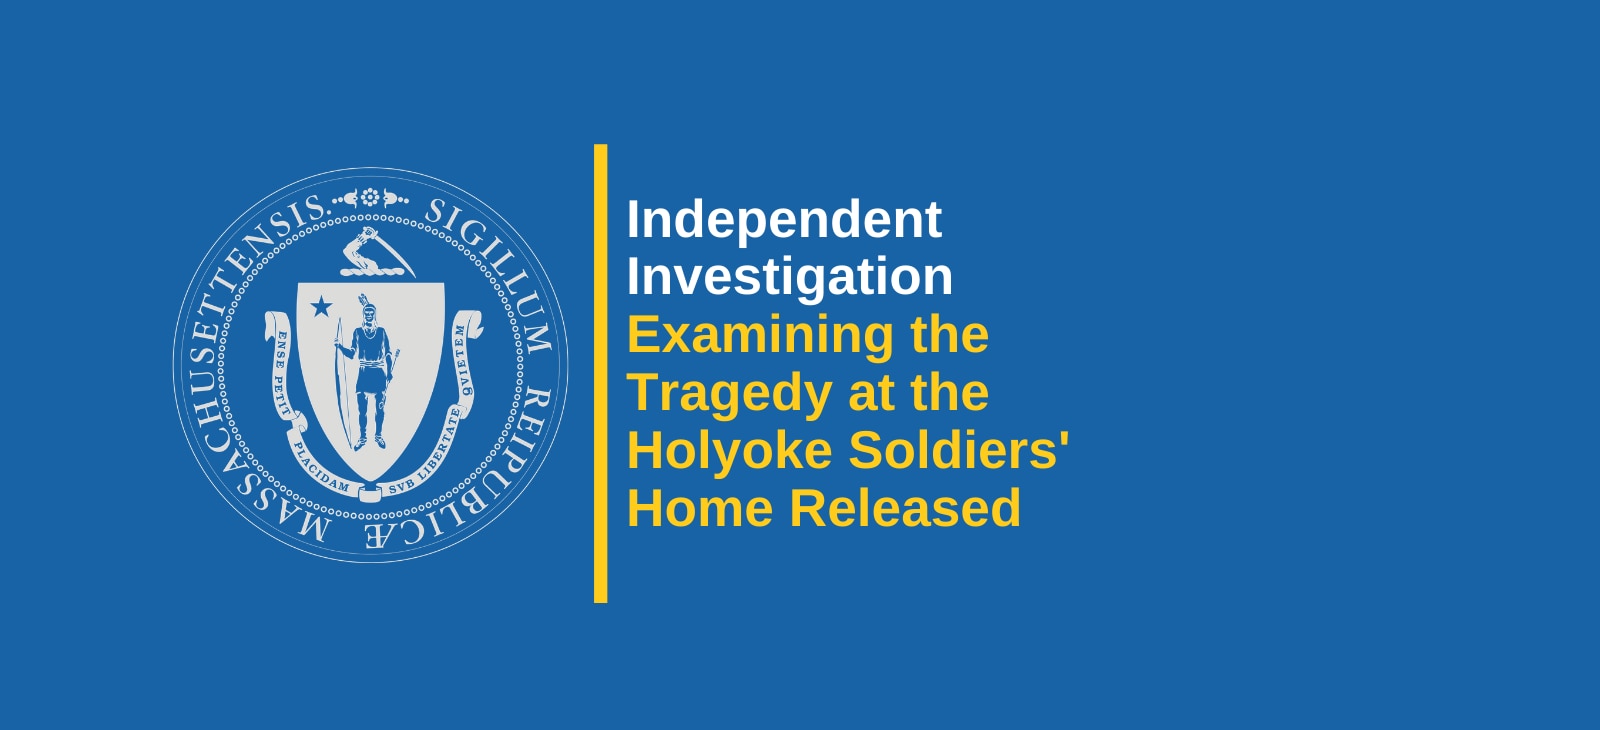 Independent Investigation Examining the Tragedy at the Holyoke Soldiers' Home Released